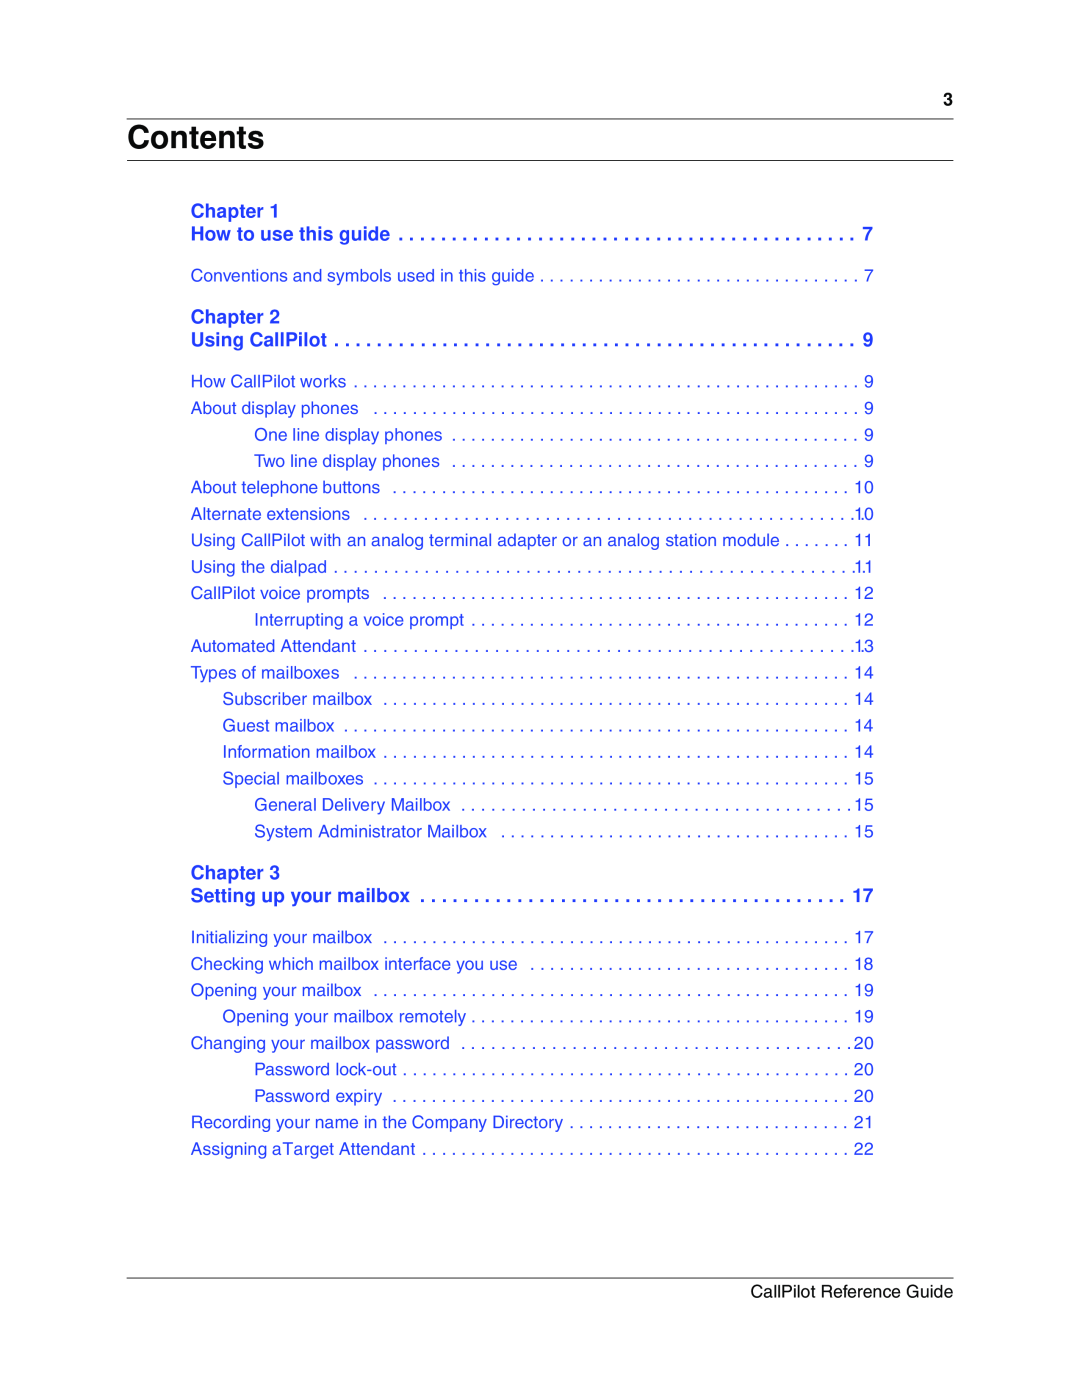 Nortel Networks manual Contents, Chapter How to use this guide, Chapter Using CallPilot, Chapter Setting up your mailbox 